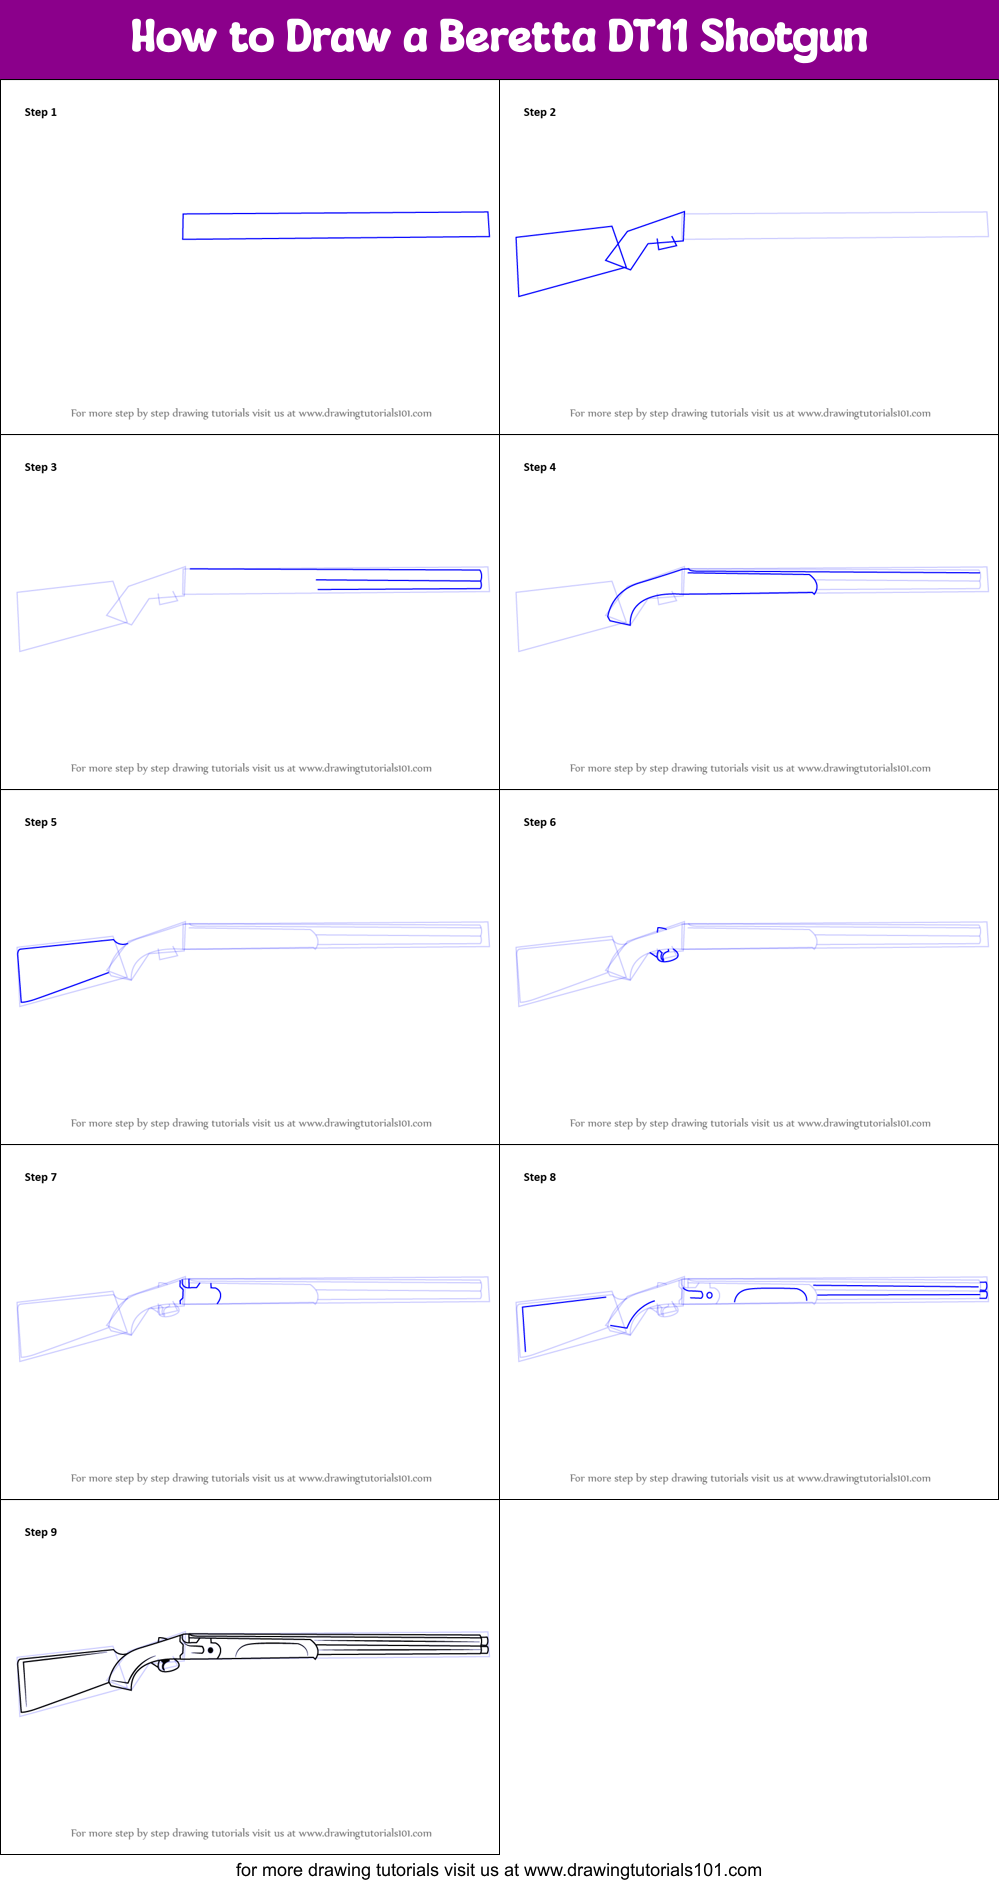 How to Draw a Beretta DT11 Shotgun printable step by step drawing sheet